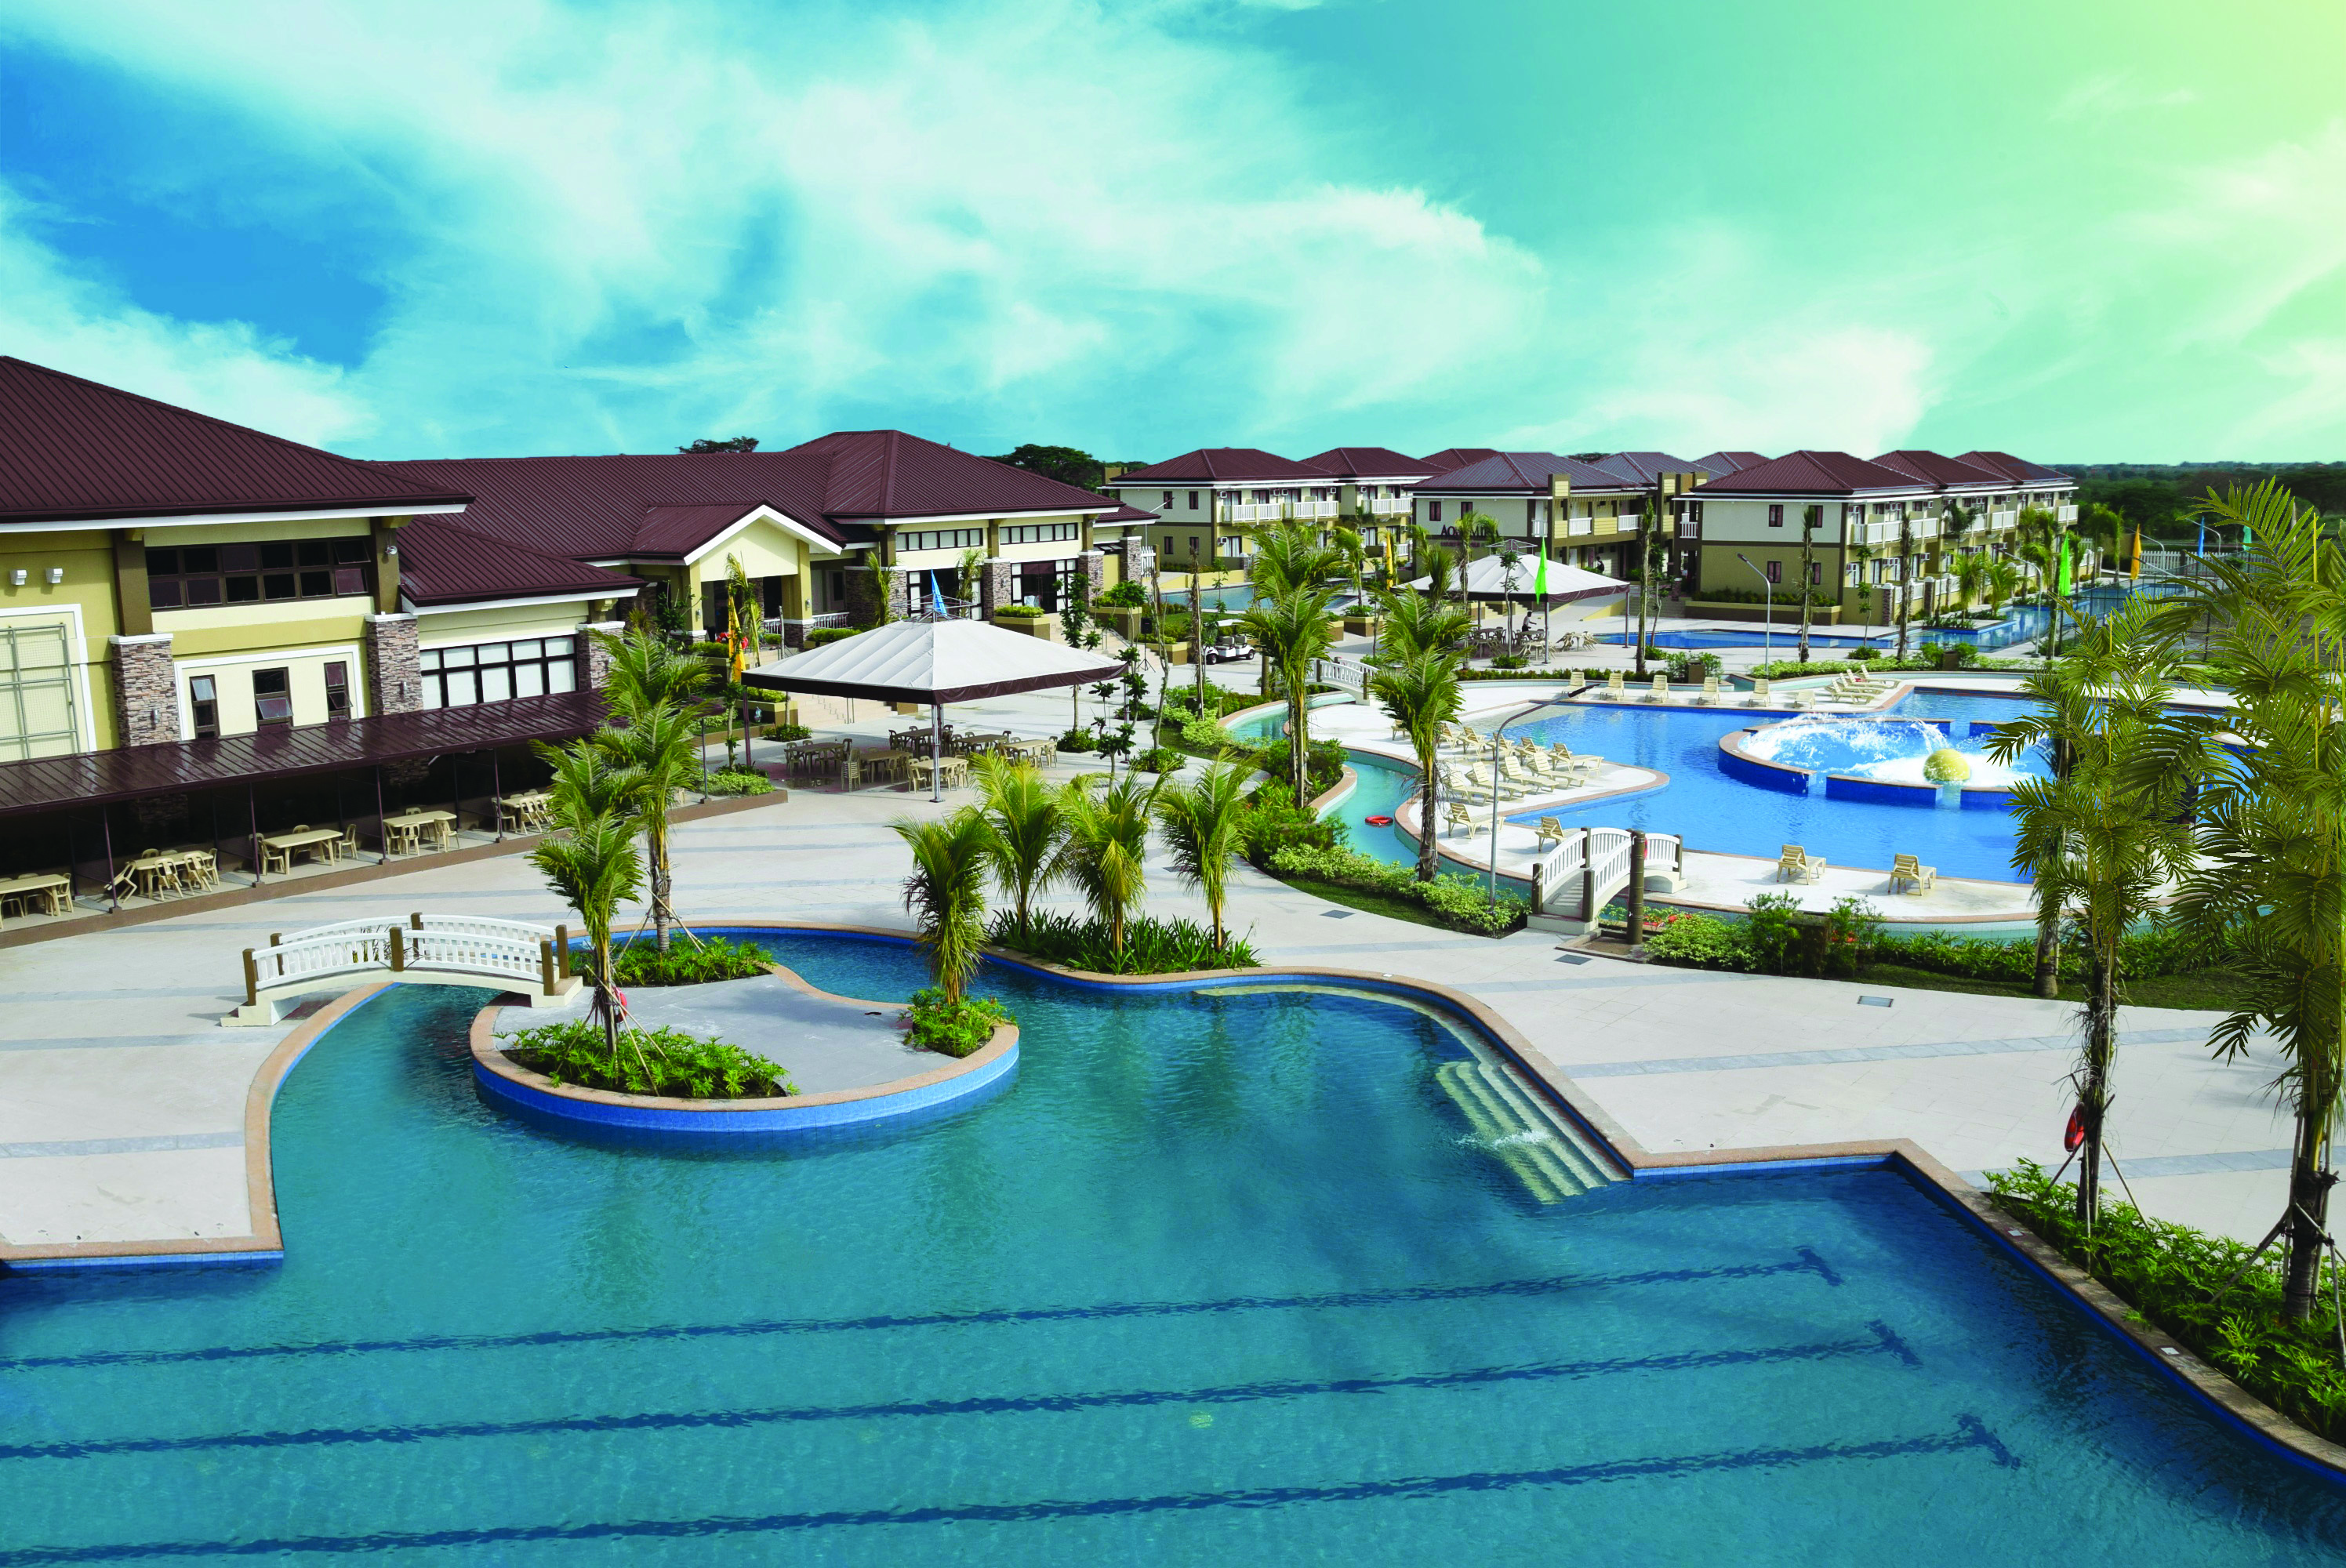 Sta. Lucia prepares hotel, resort expansion on tourism prospects